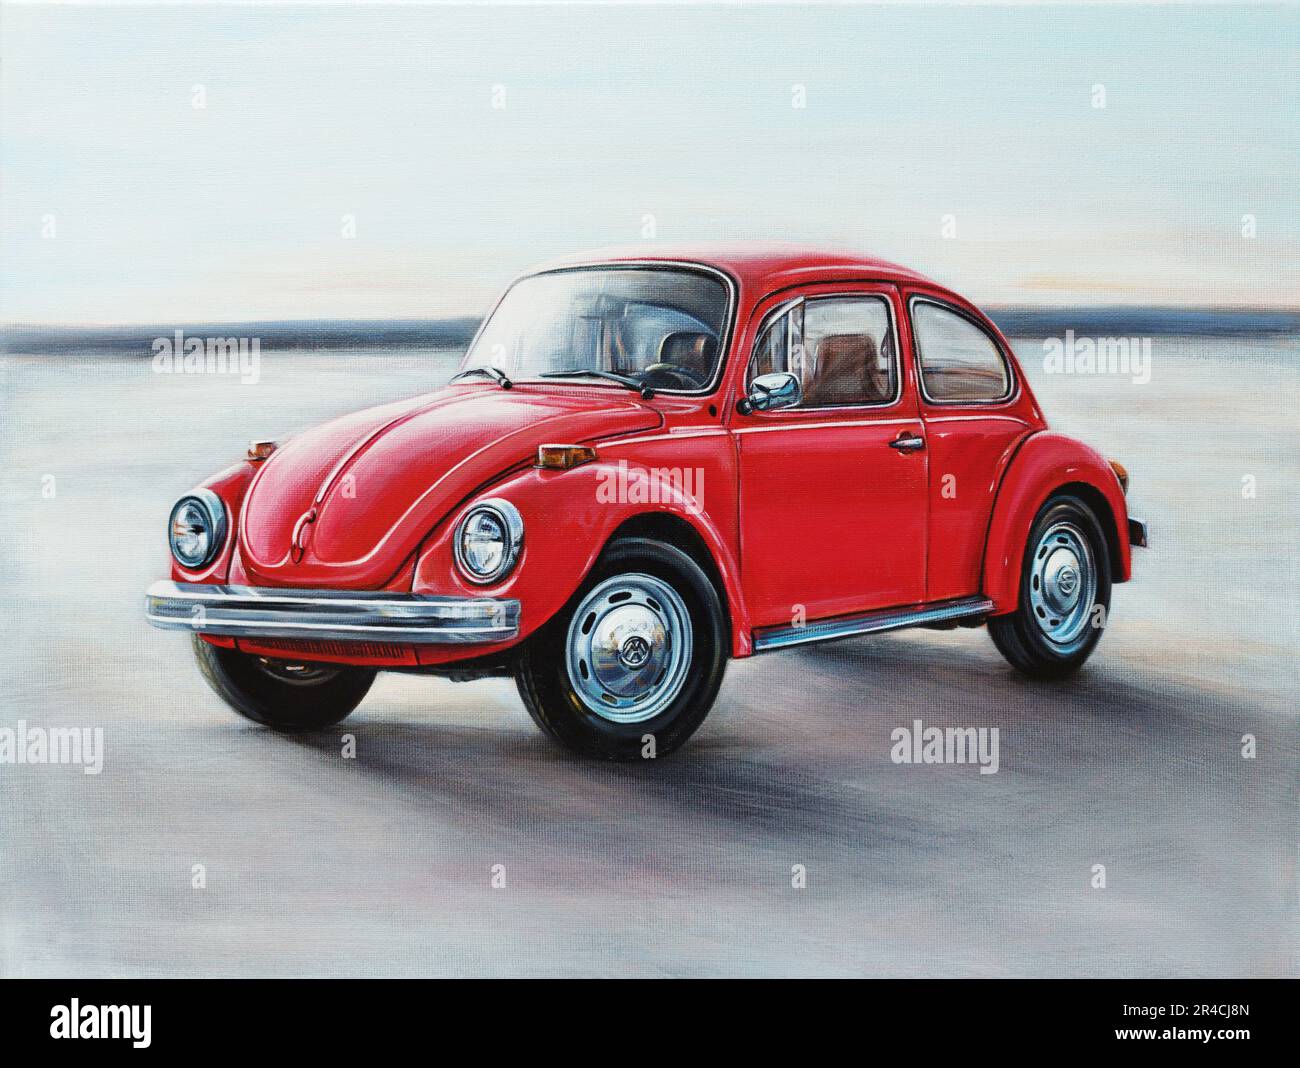 This beautiful acrylic painting on a 30x40 cm canvas depicts an elegant red Volkswagen Käfer Stock Photo